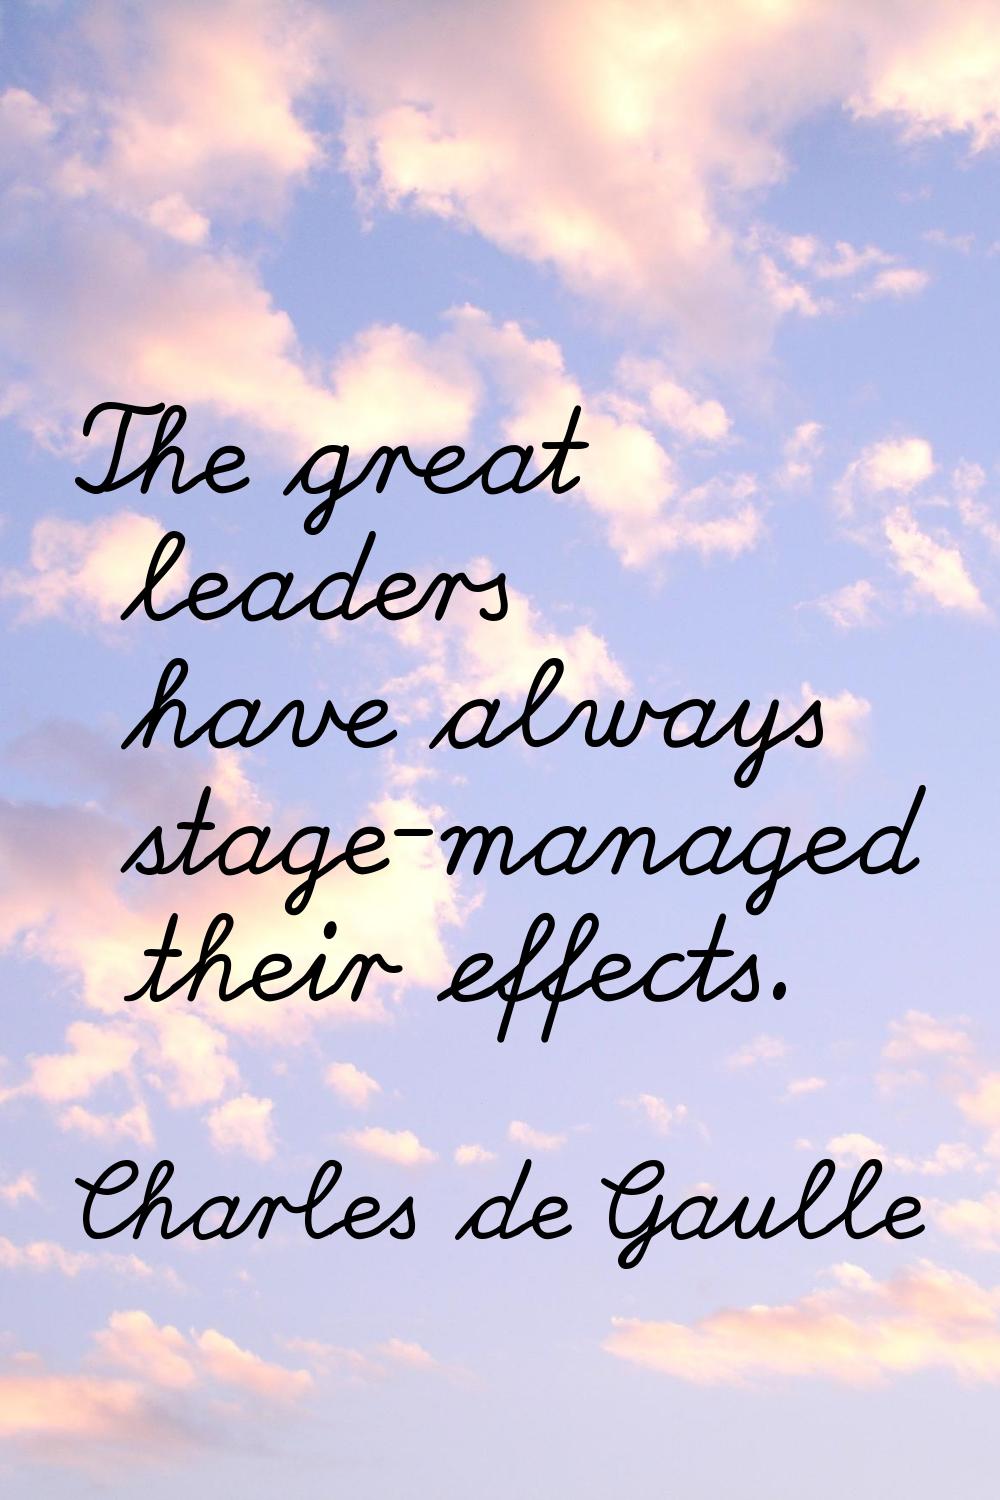 The great leaders have always stage-managed their effects.